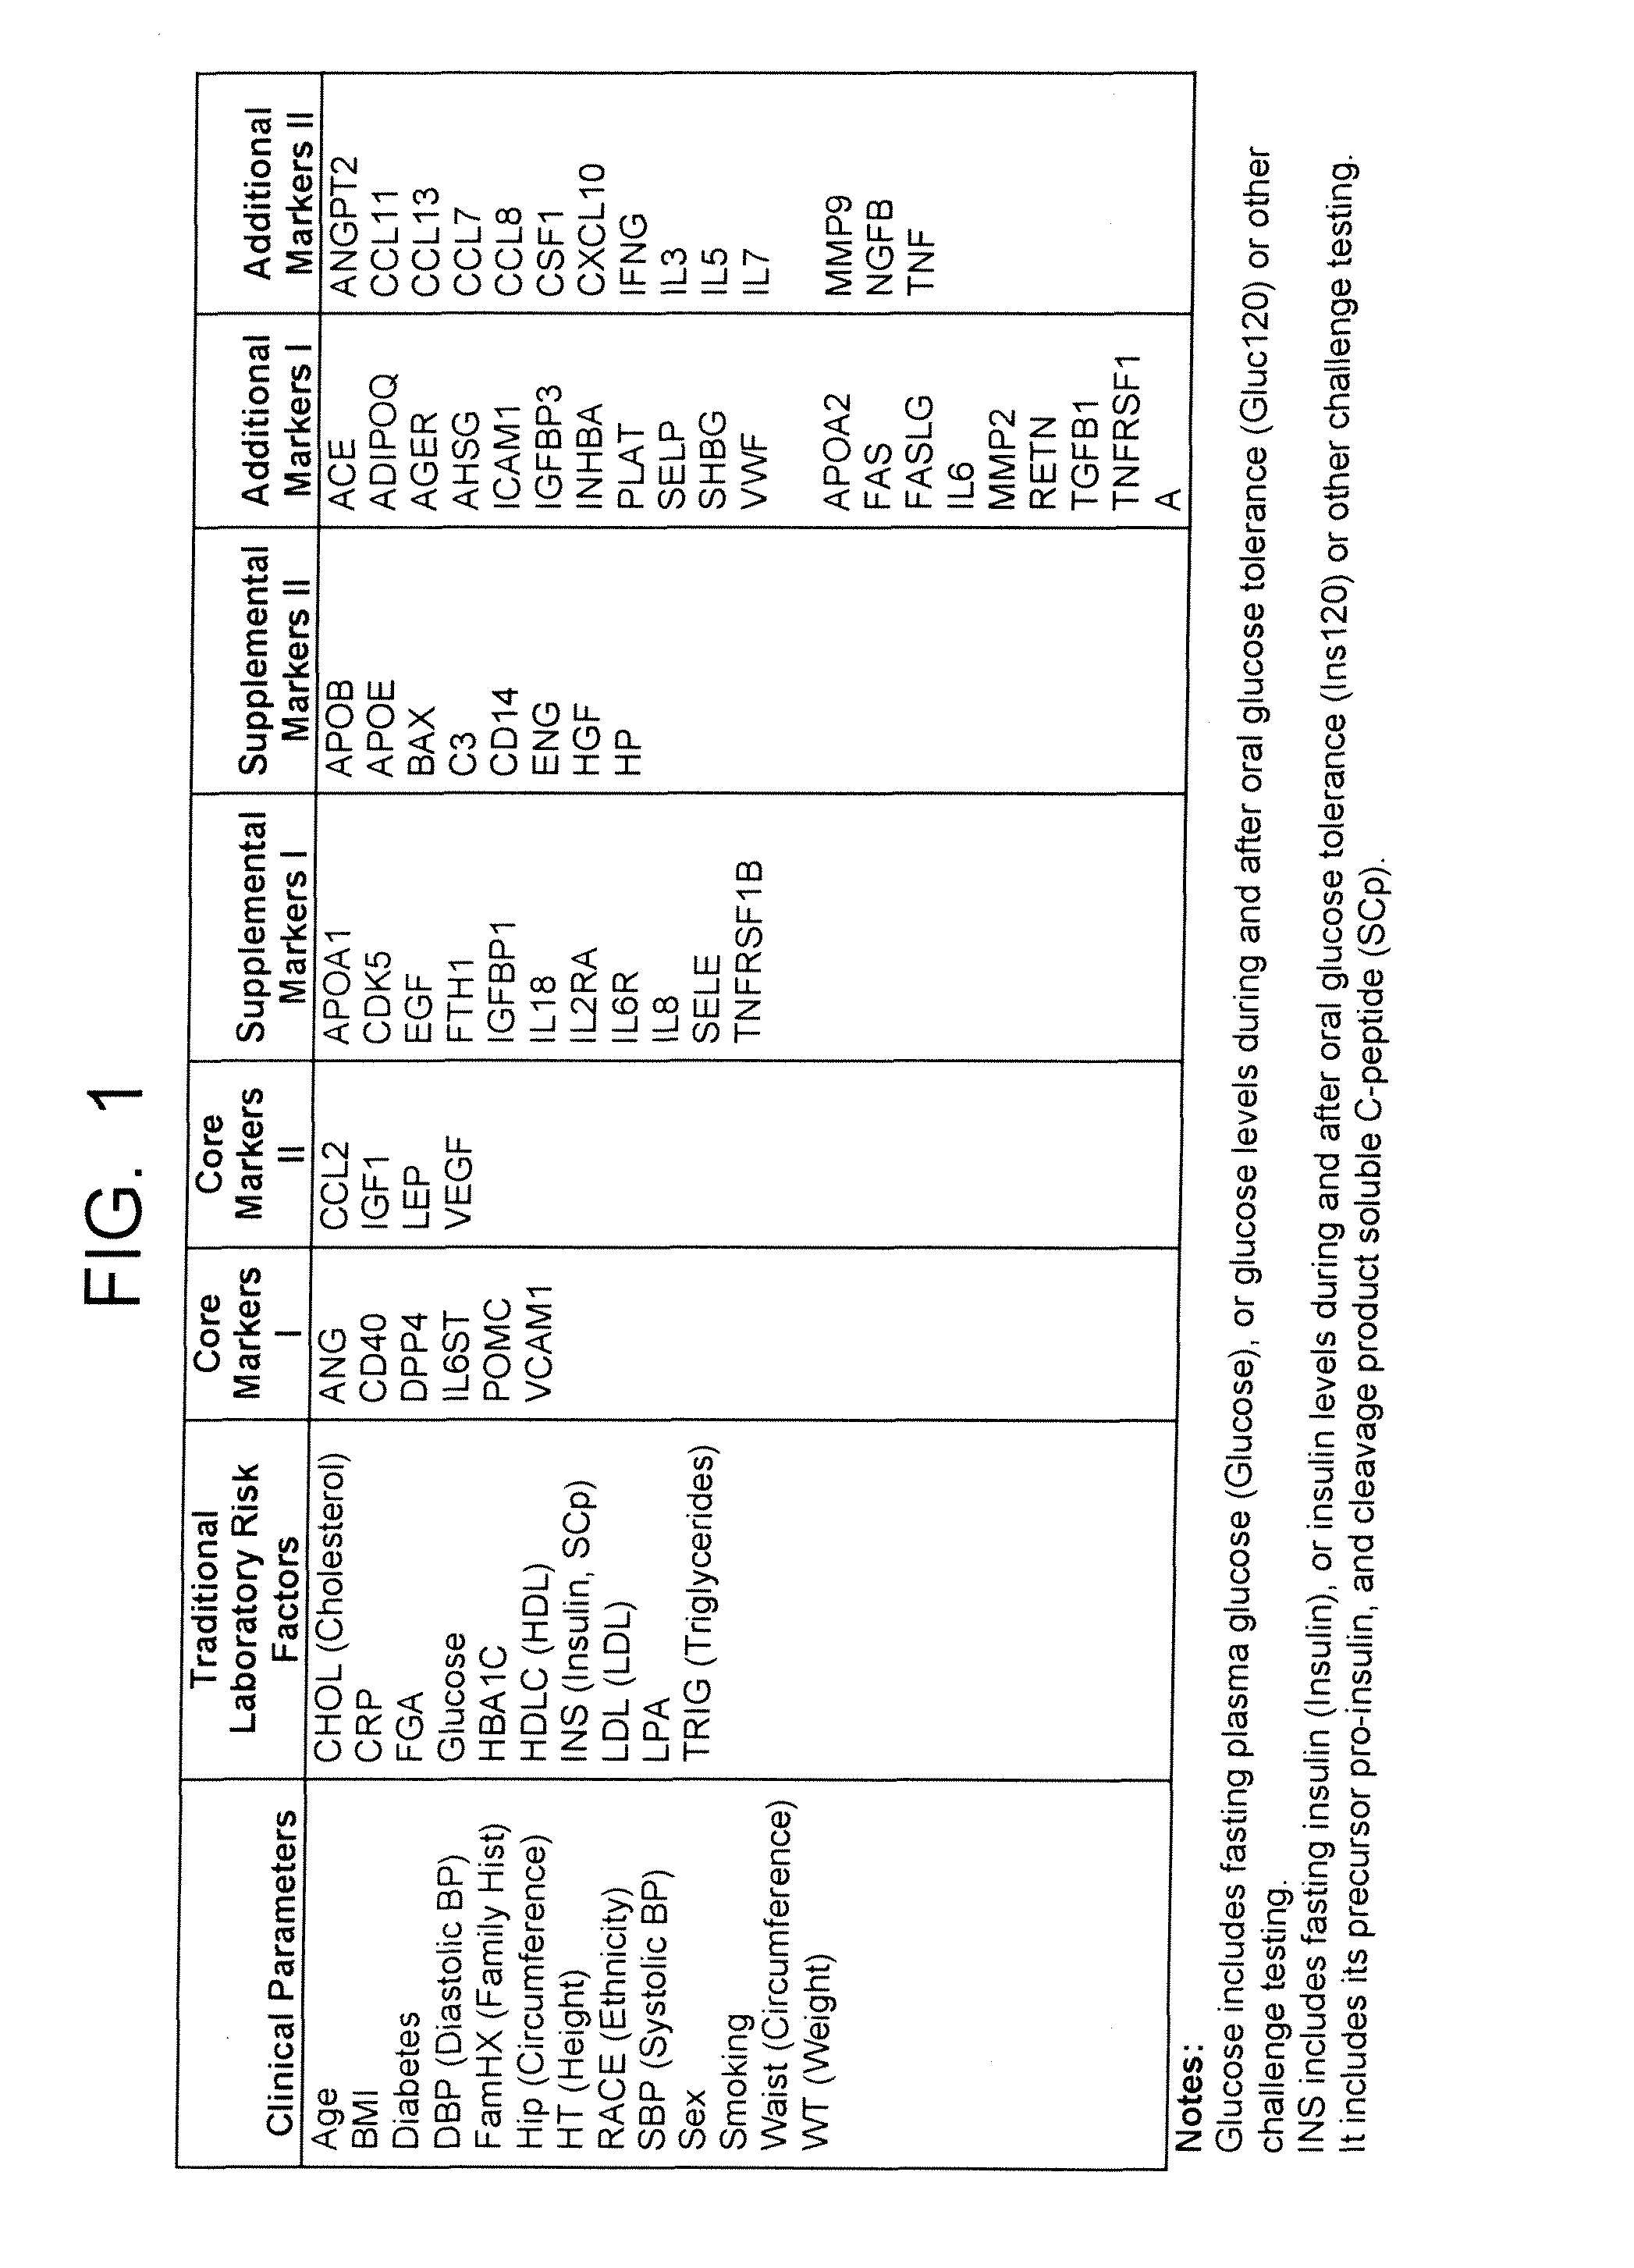 Markers Associate with Arteriovascular Events and Methods of Use Thereof